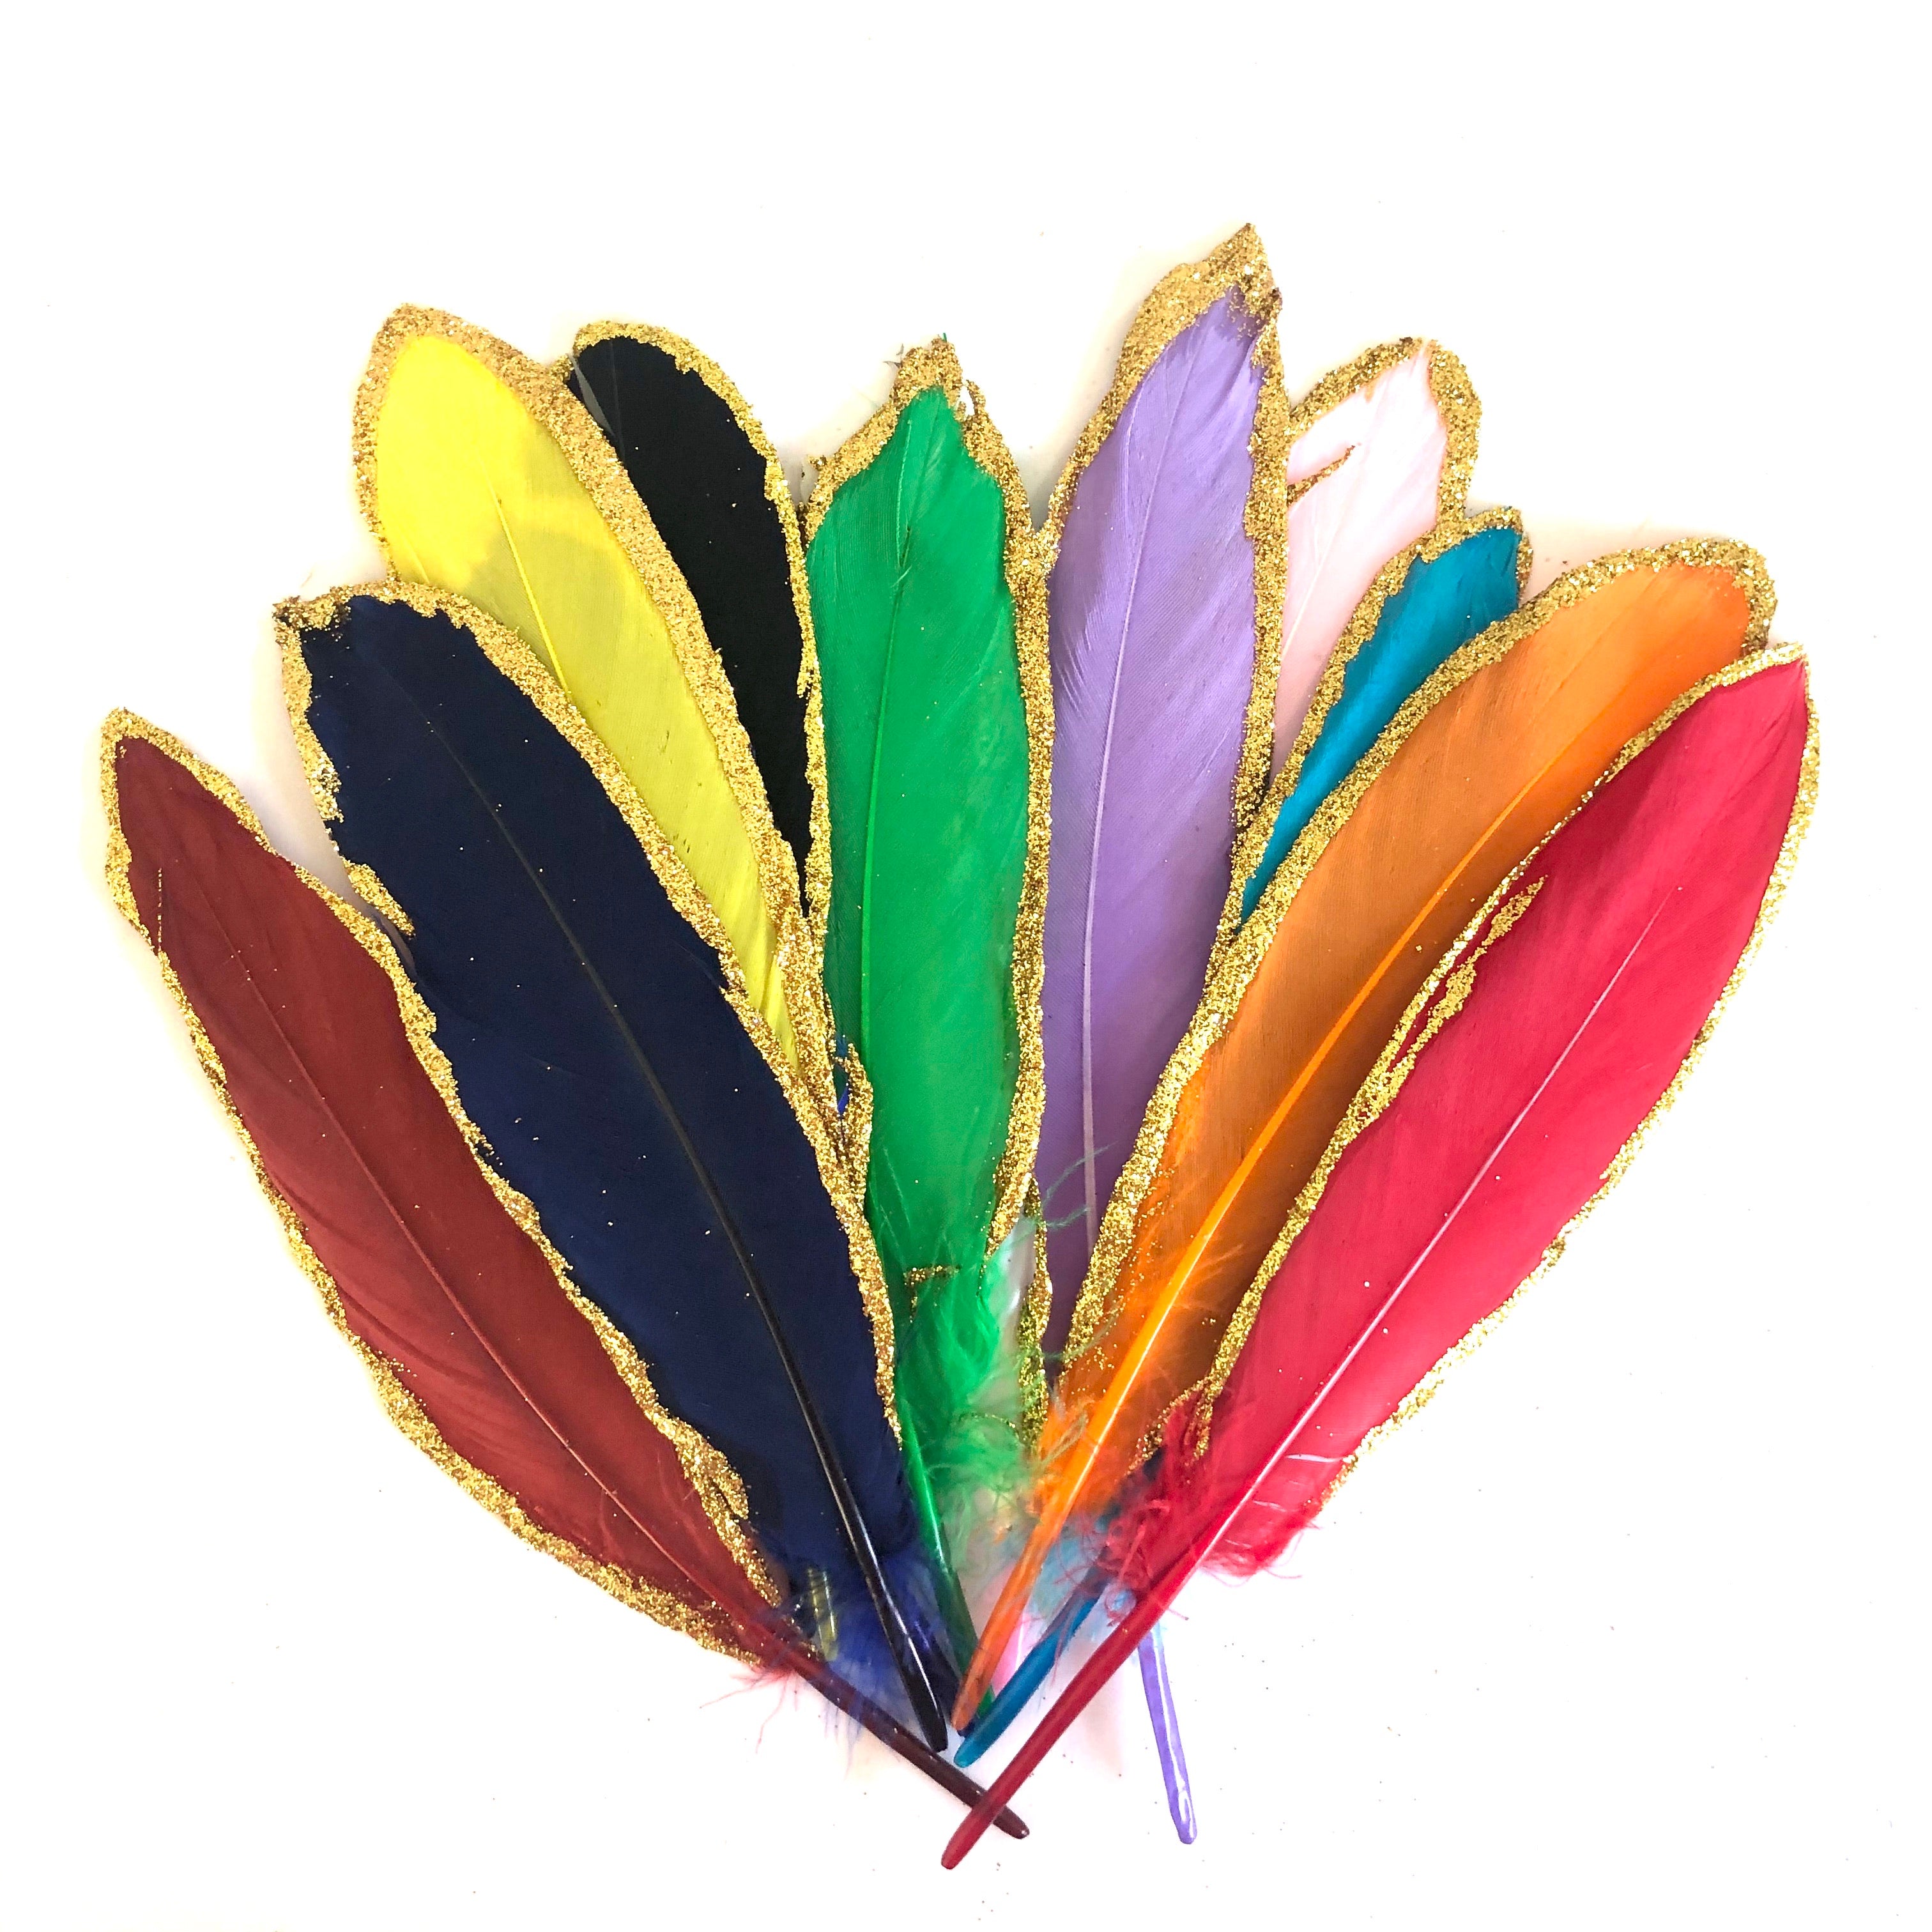 Gold Glitter Edge Goose Pointer Feathers x 10 pcs - Rainbow Assorted - Style 18